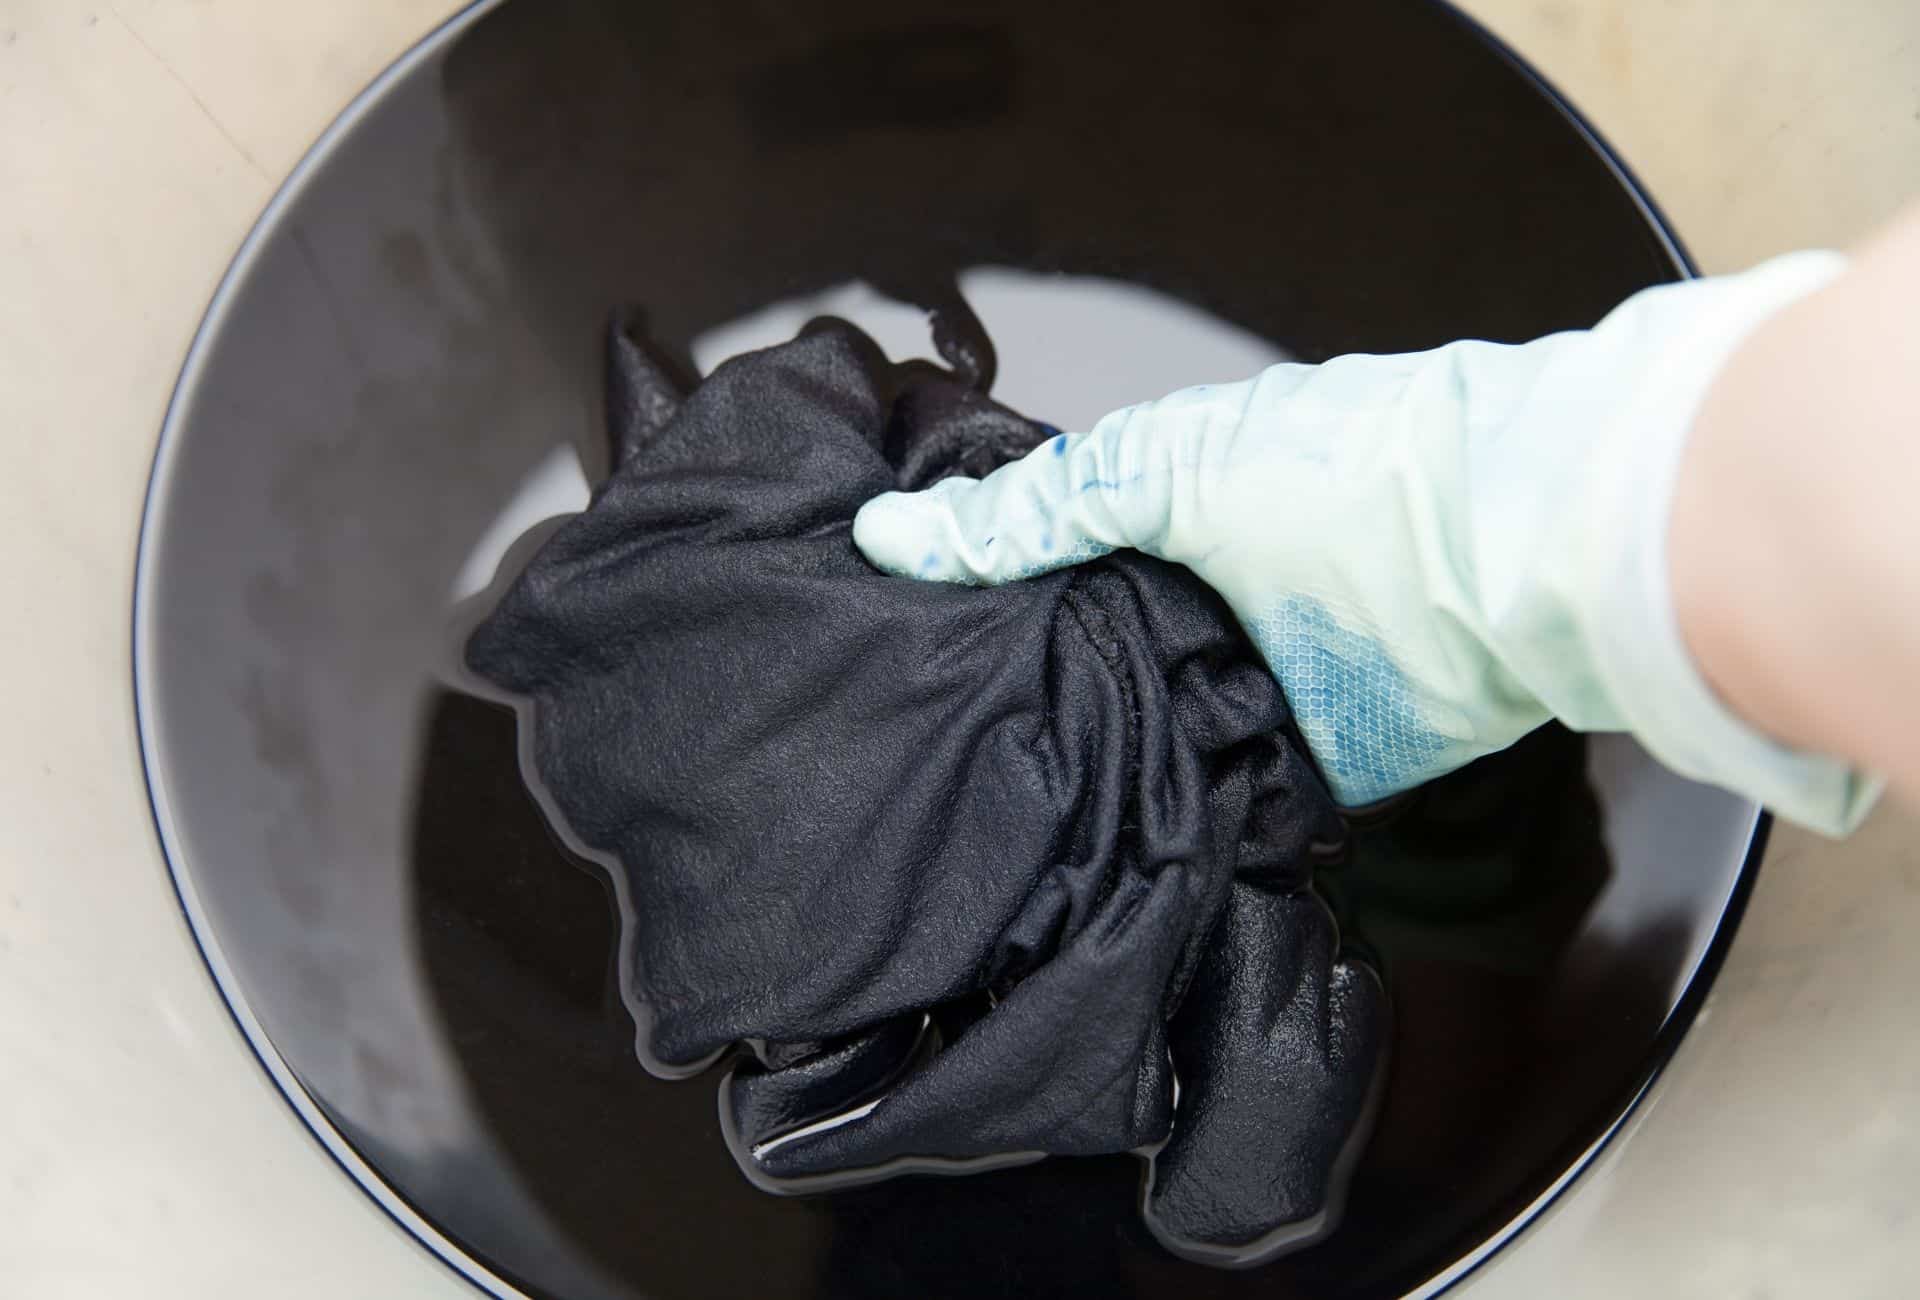 Fabric dying in a black dye